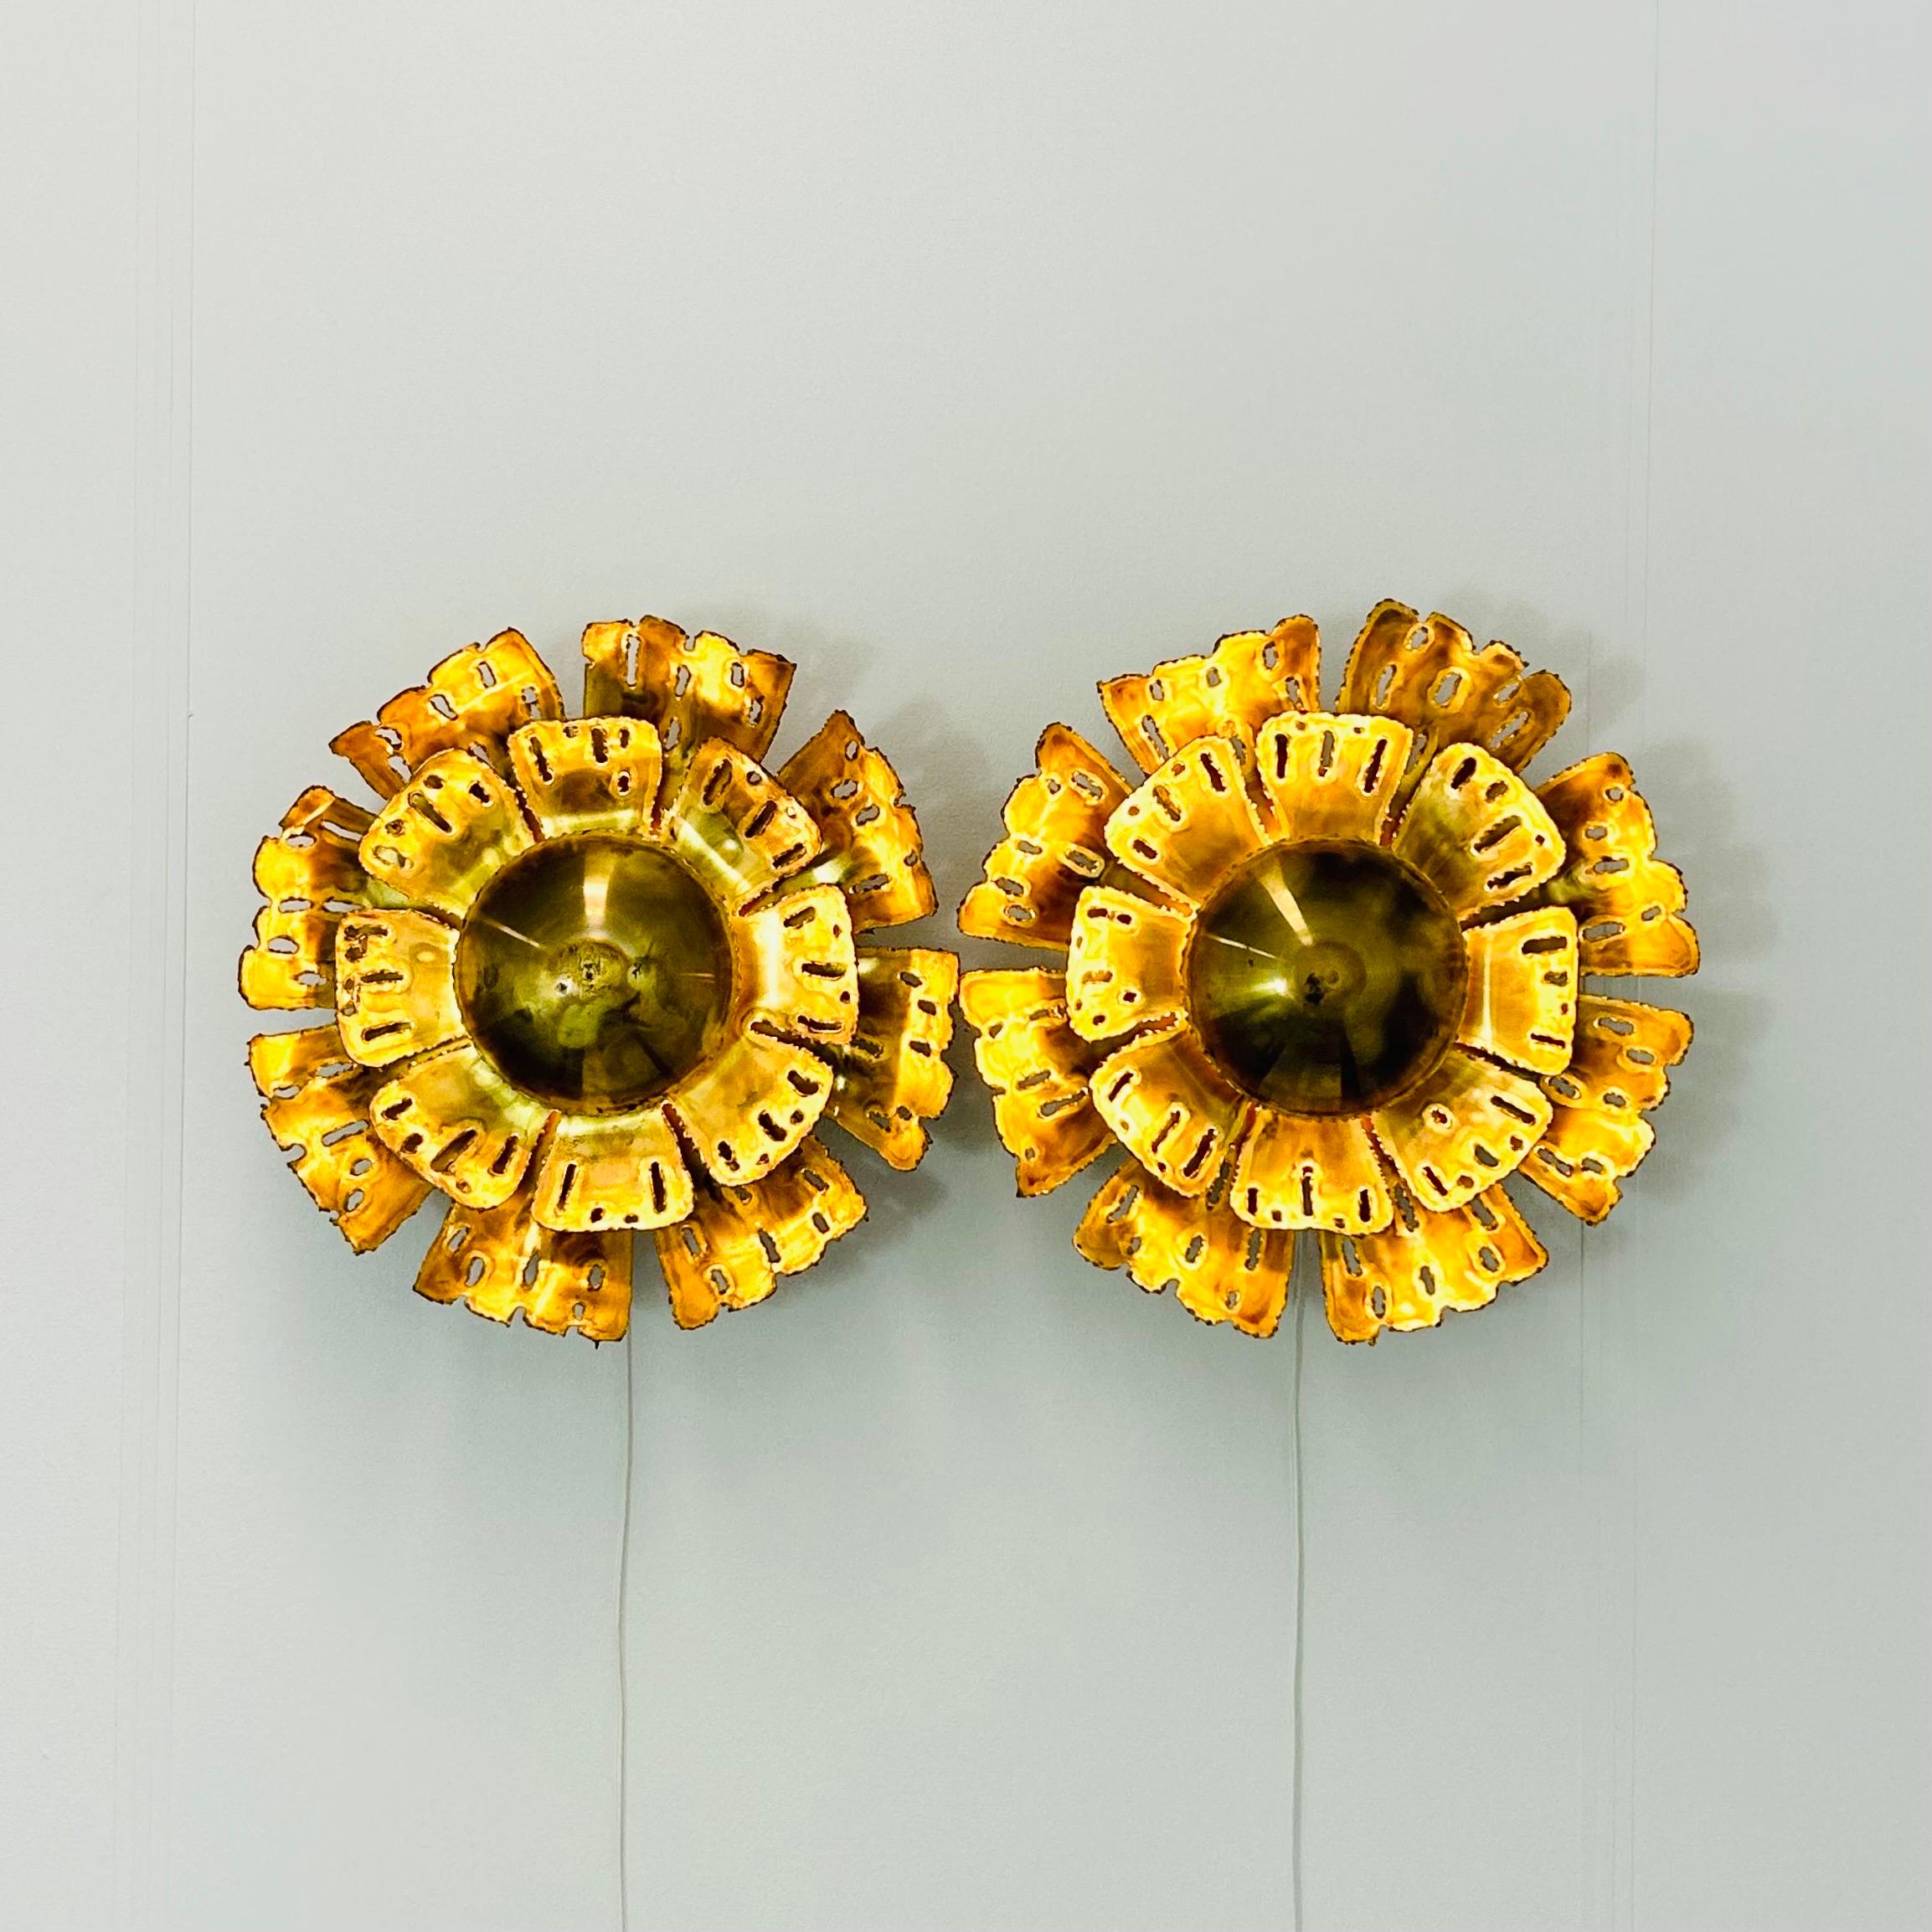 Danish Pair of Large Brass Wall Lamps by Svend Aage Holm Sorensen, 1960s, Denmark For Sale